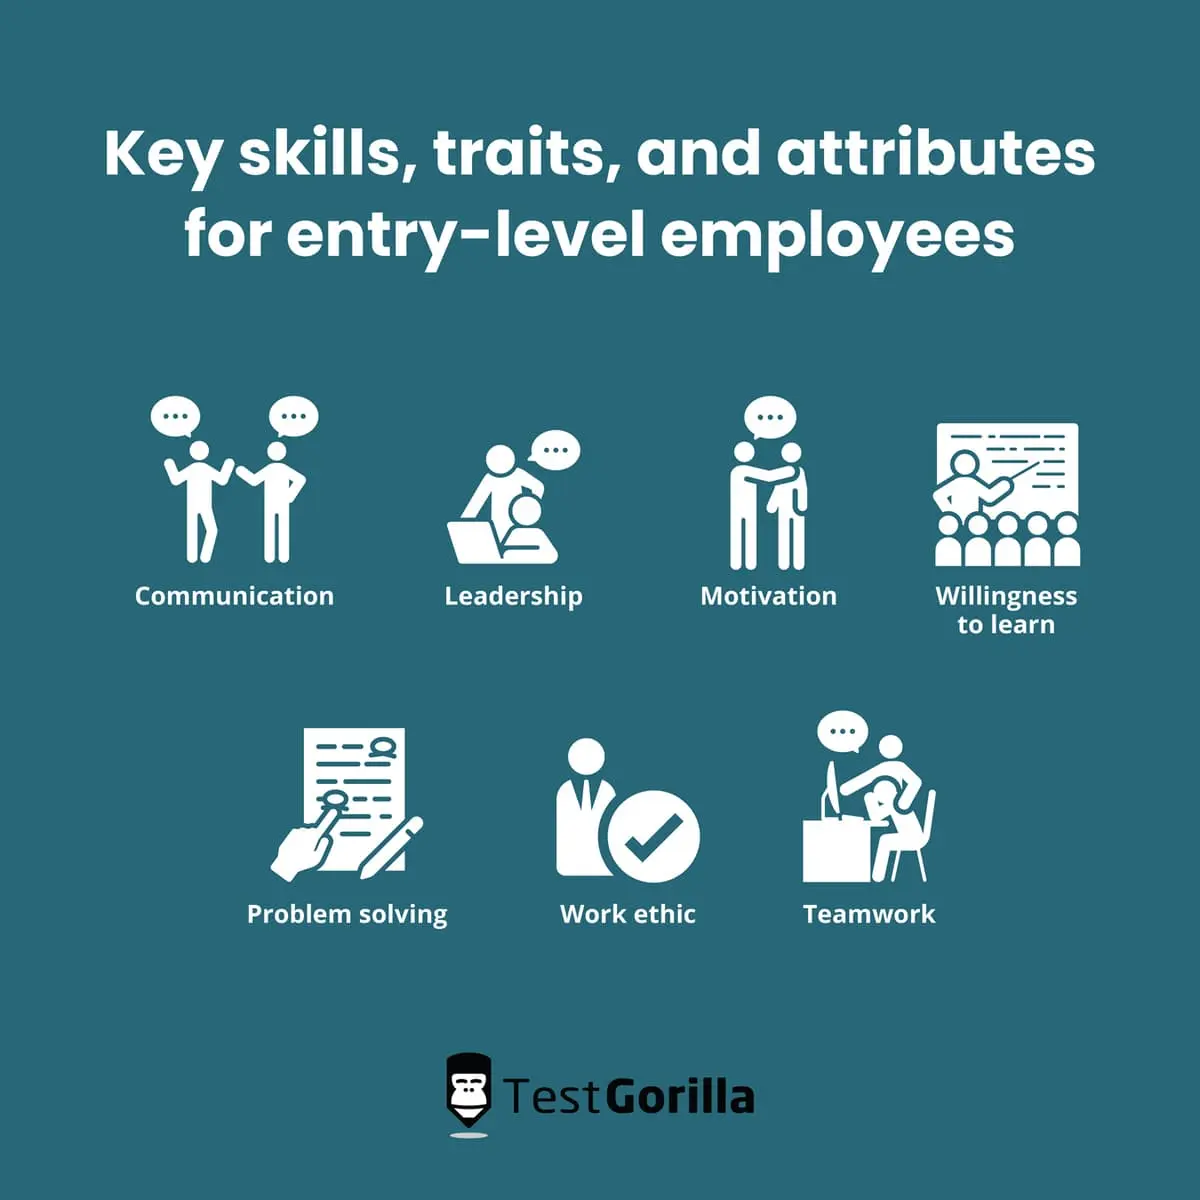 key skills, traits and attributes for entry-level employees